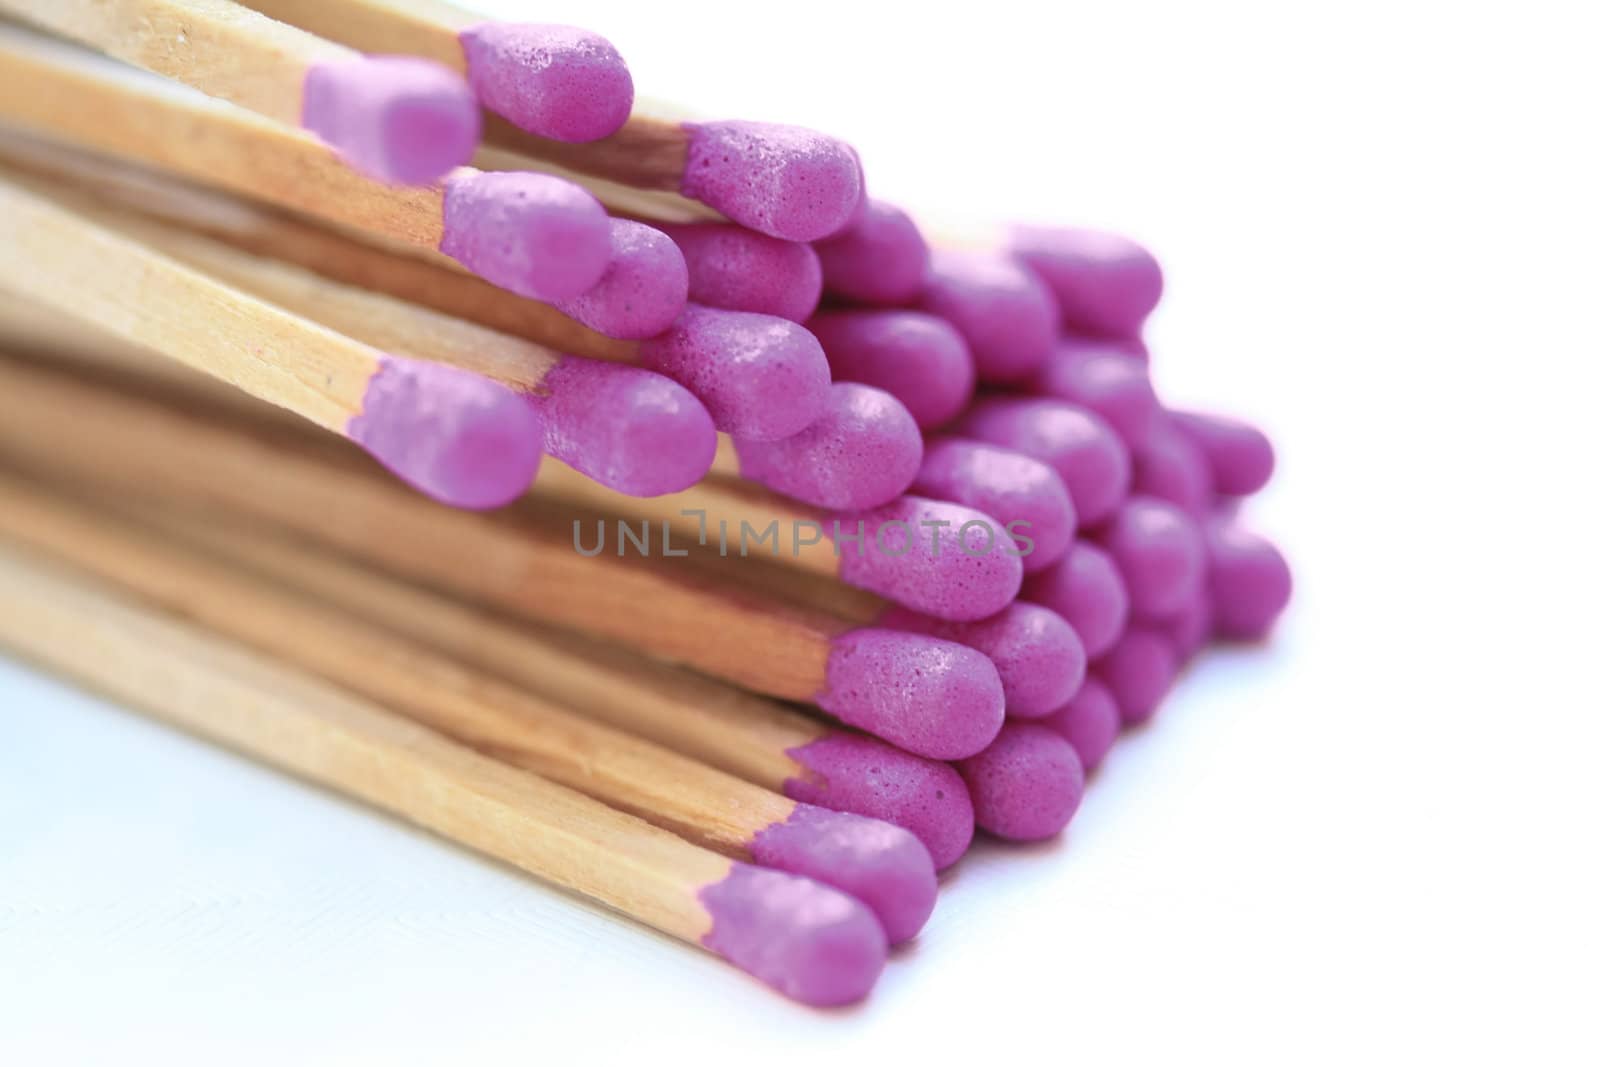 A pile of matches with purple tips